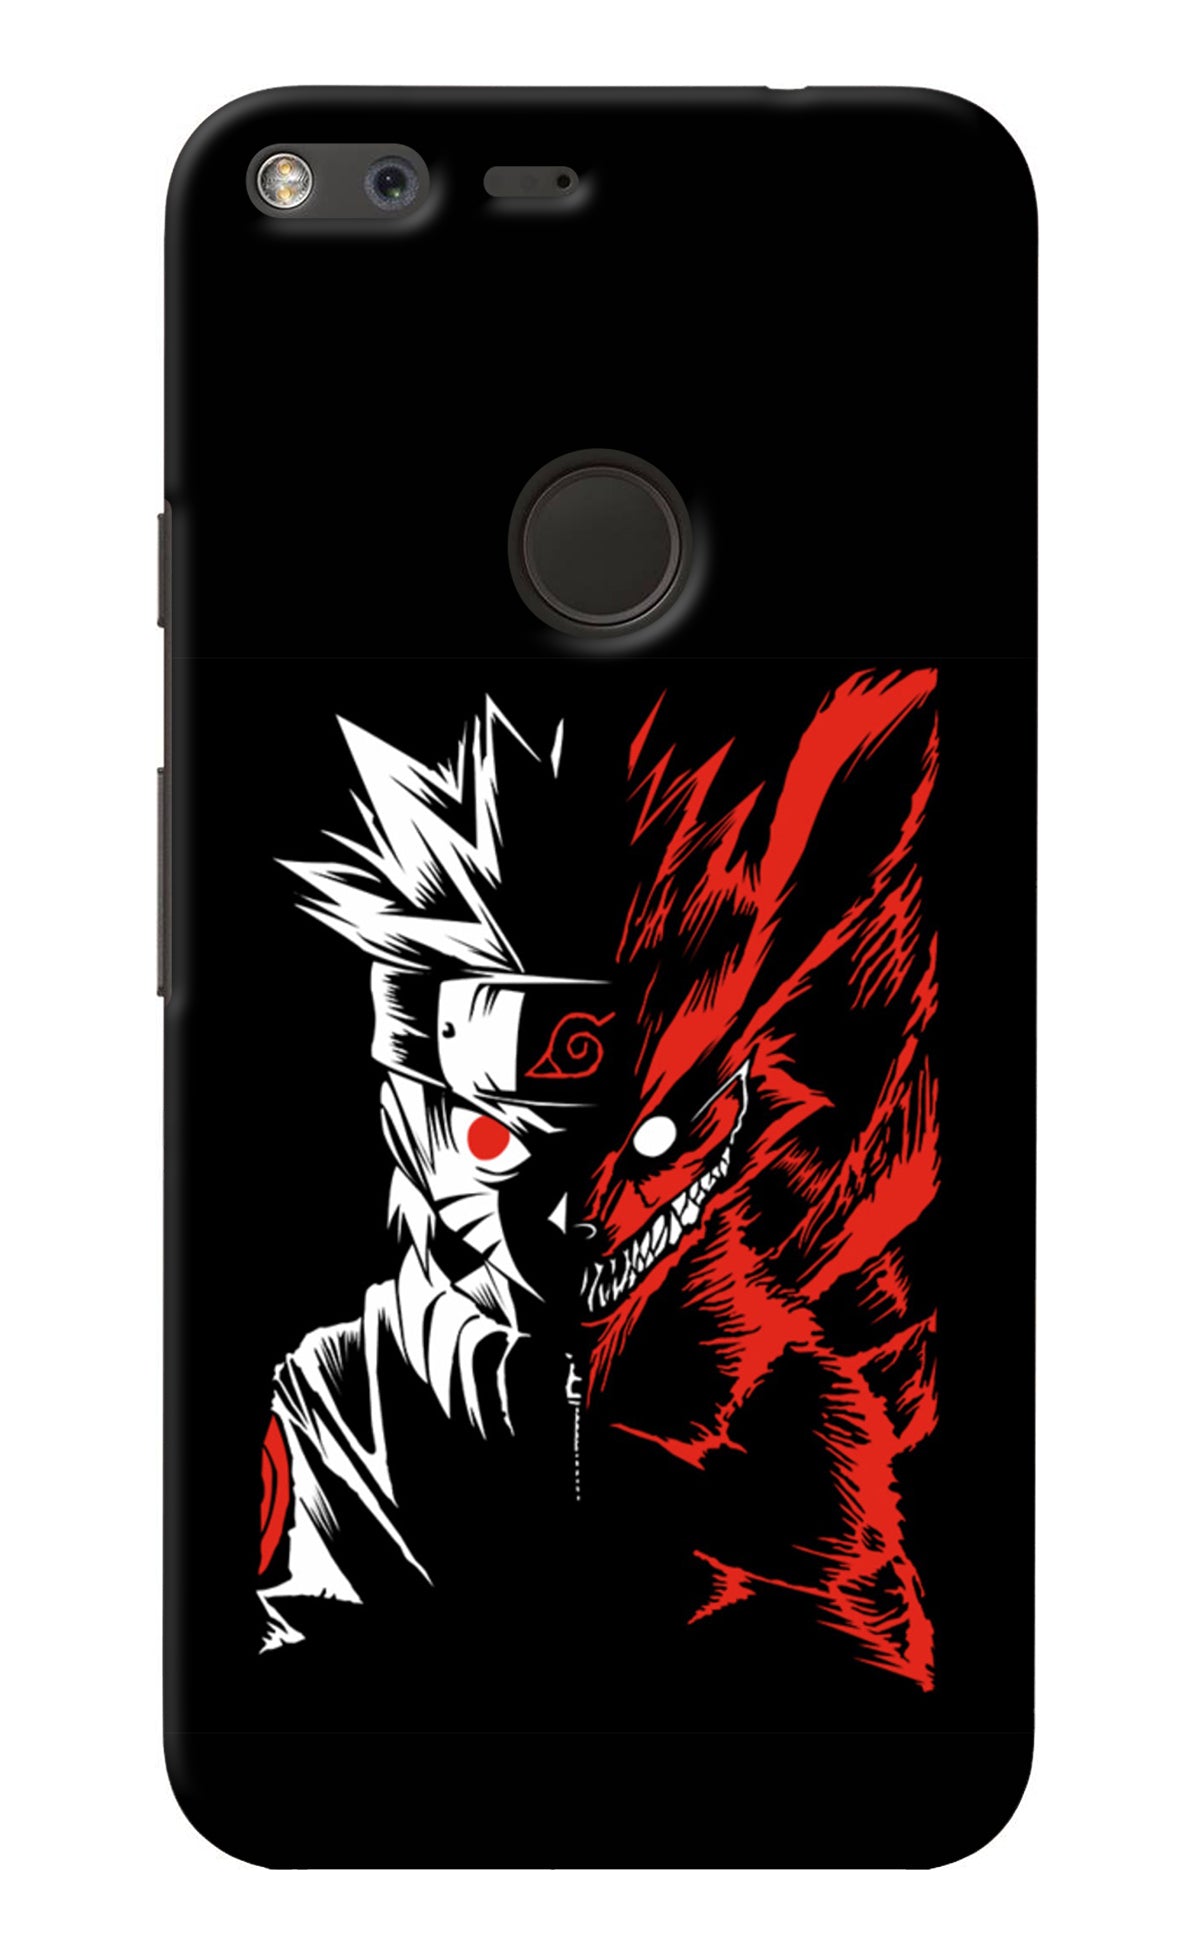 Naruto Two Face Google Pixel XL Back Cover